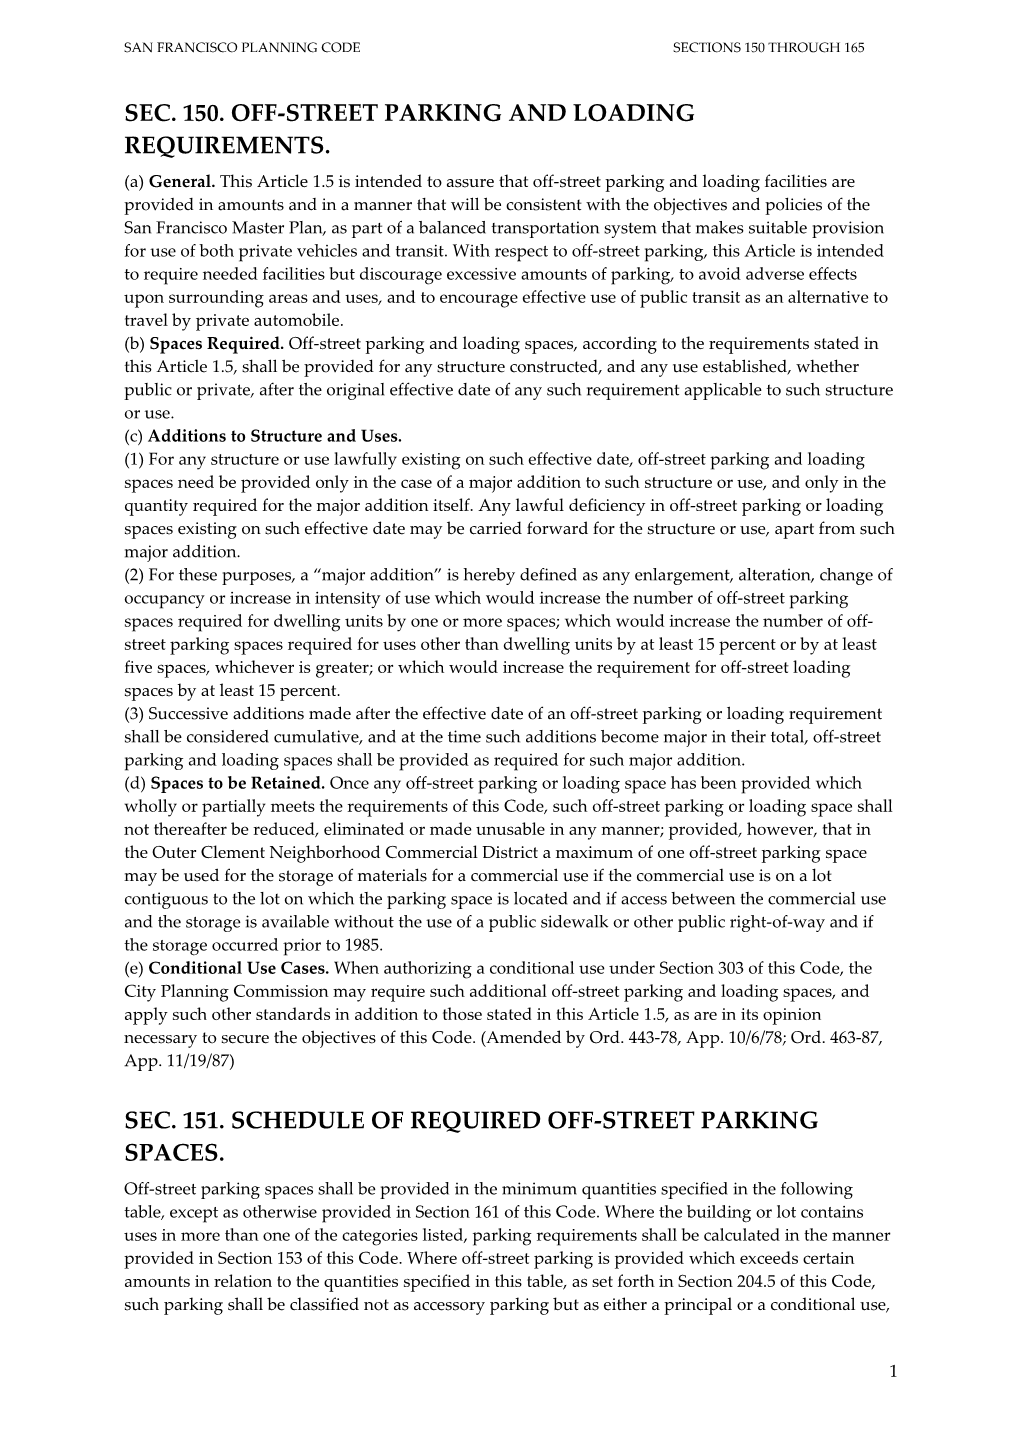 Sec. 150. Off-Street Parking and Loading Requirements